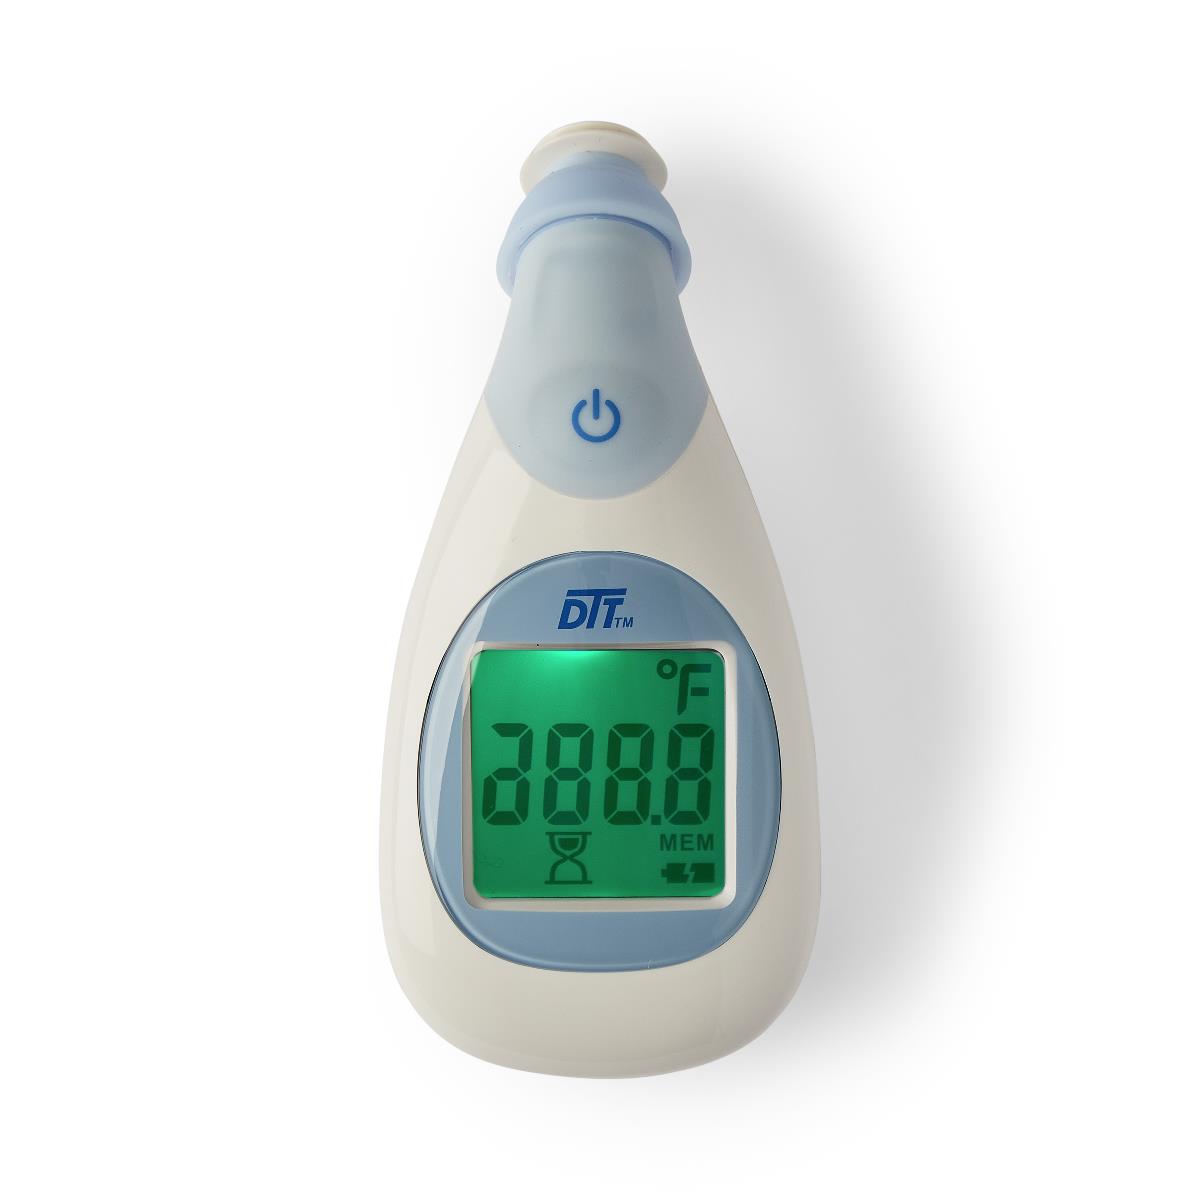 Instant Read Digital Temple Thermometer